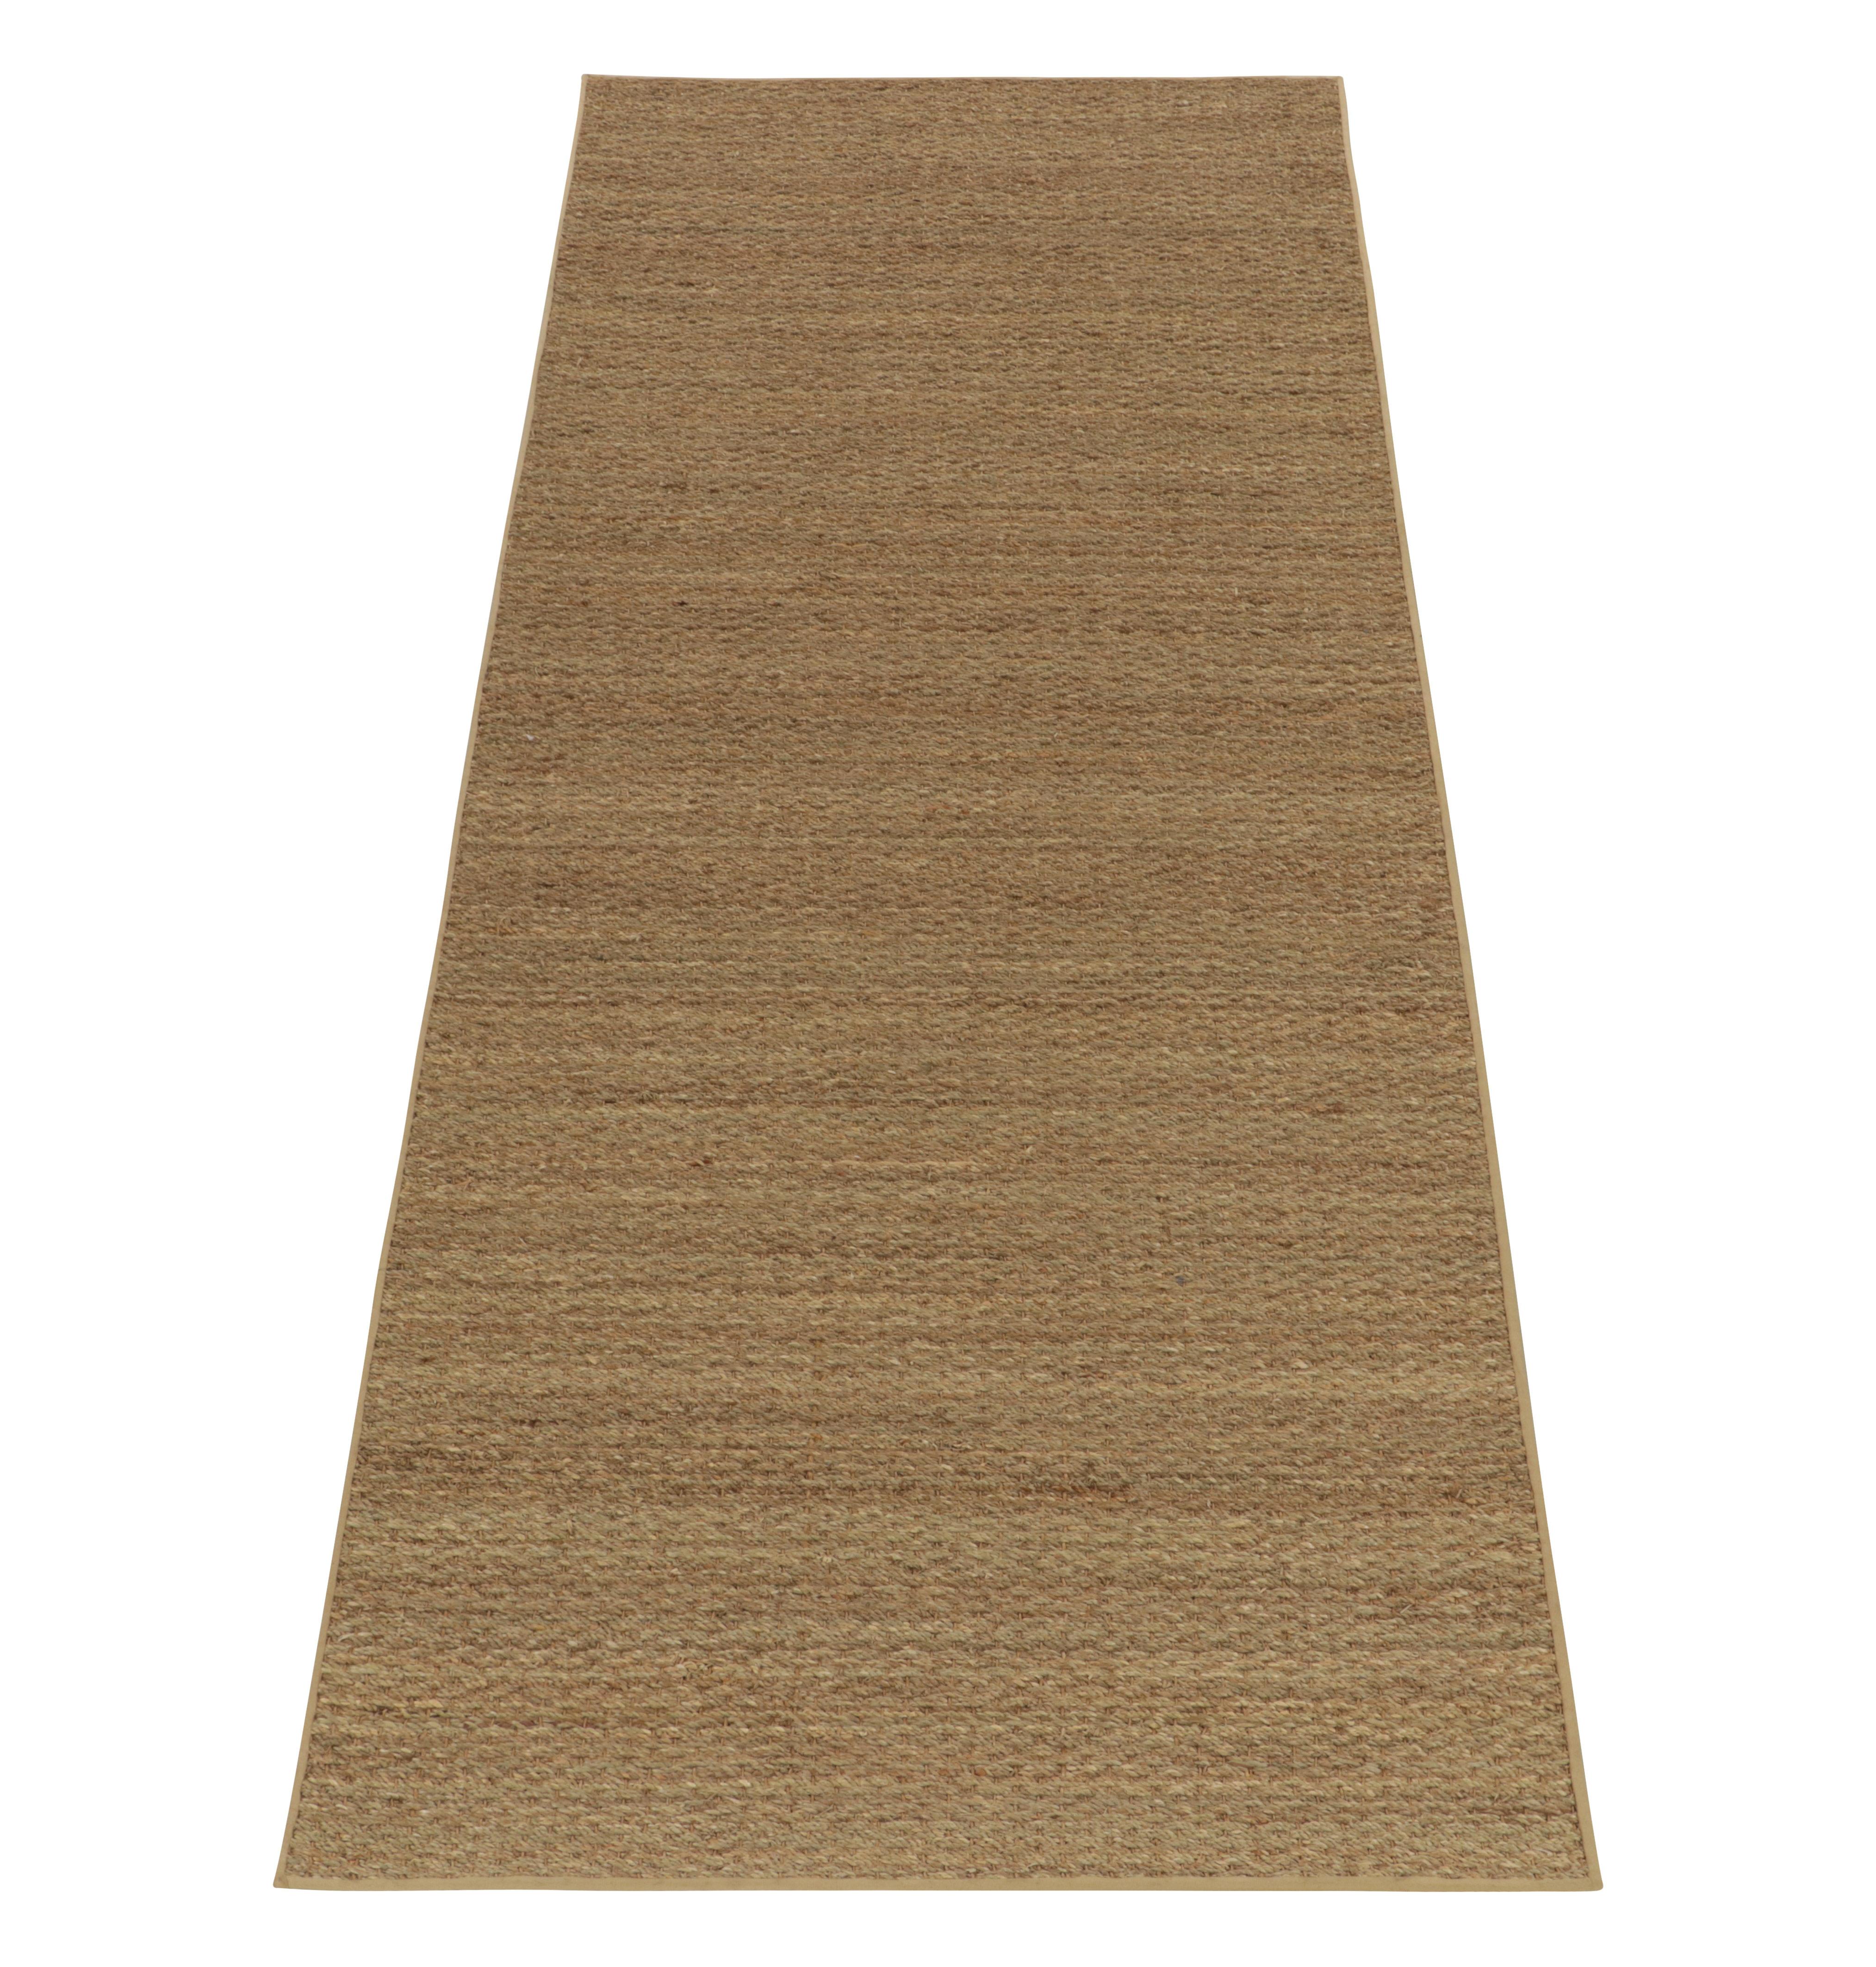 Crafted with hemp,a 3x9 runner from Rug & Kilim’s contemporary selections. Exemplified in this 3x9 scale, the vision amplifies the refreshing earthiness of the collection with solid beige-brown tones for an alluring earthy appeal in modern style.